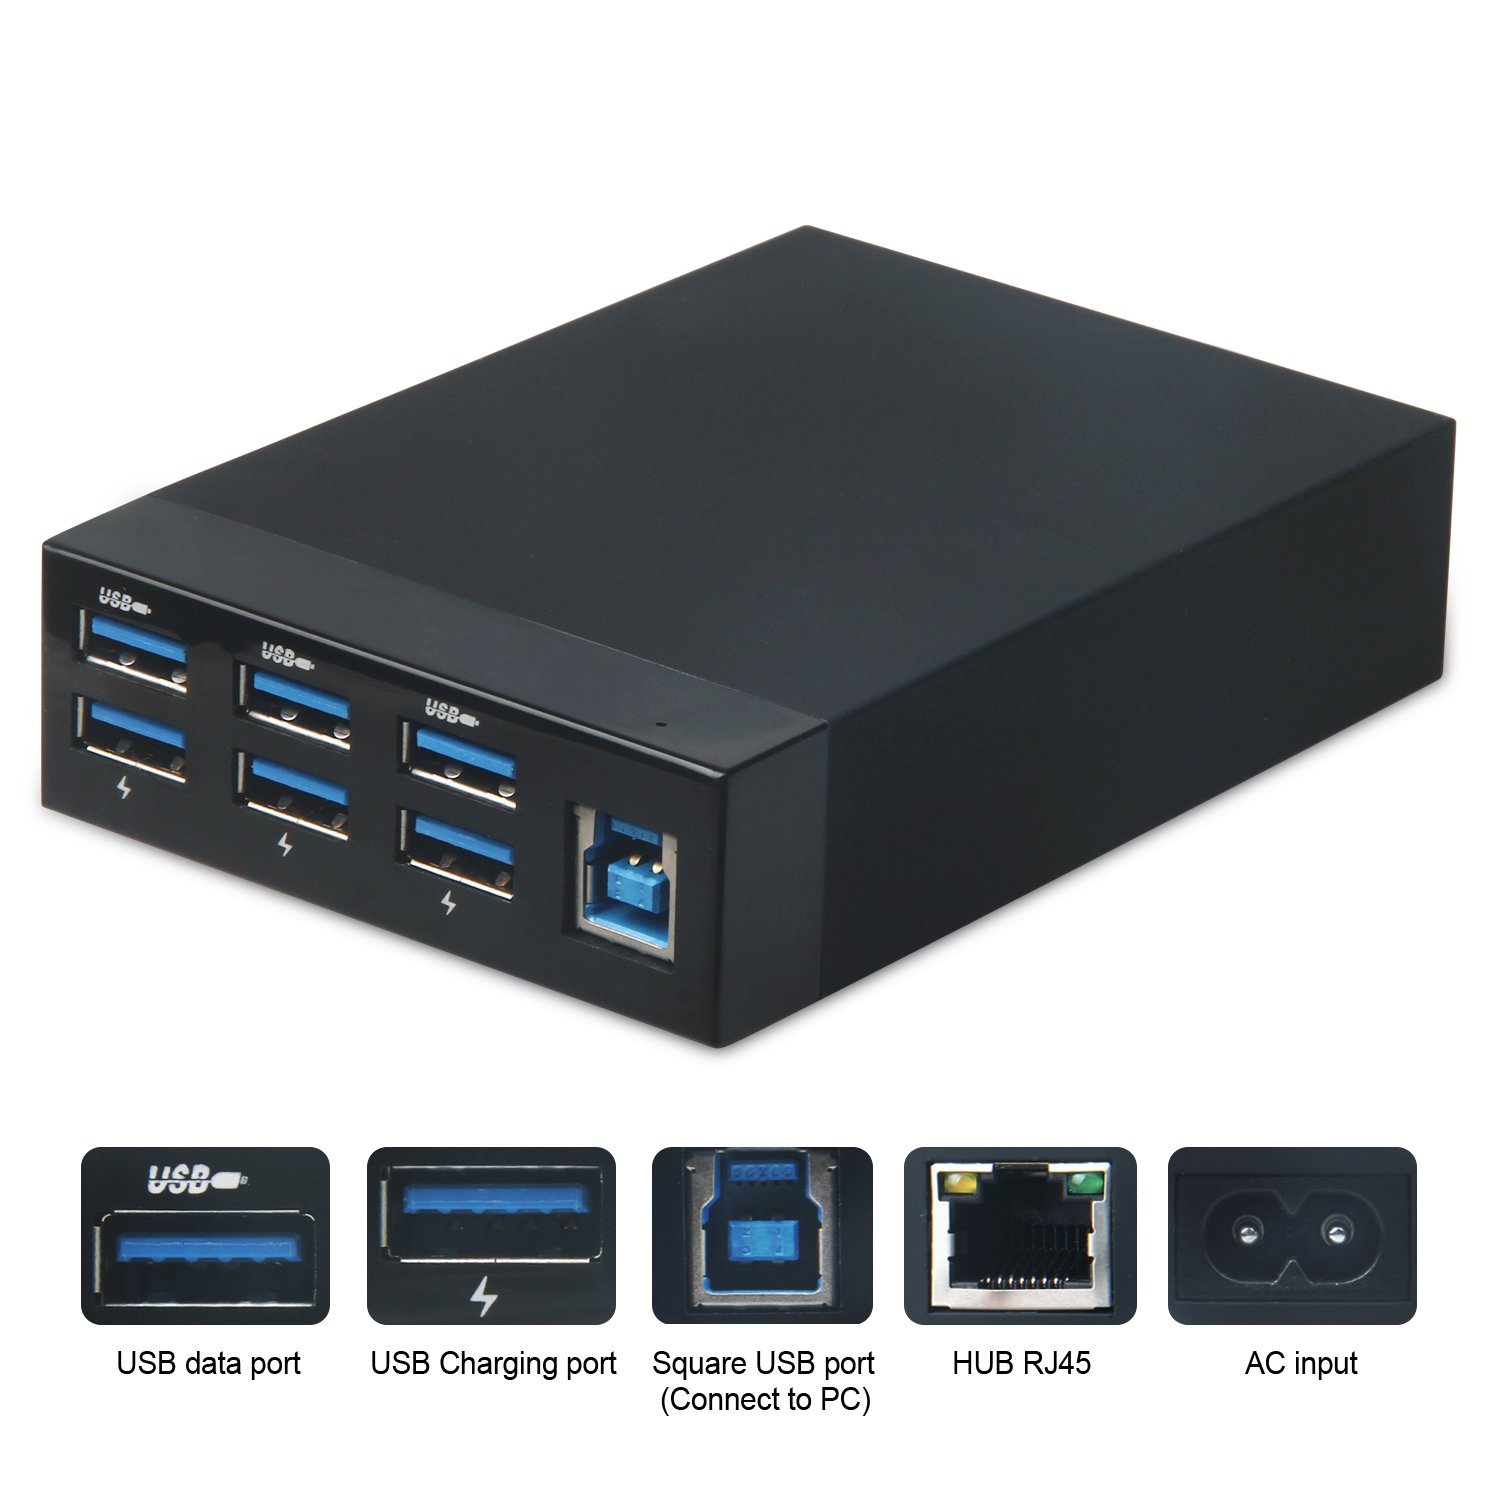 Top 10 Best Ethernet USB Hubs for PC Buying Guide 2016-2017 on Flipboard